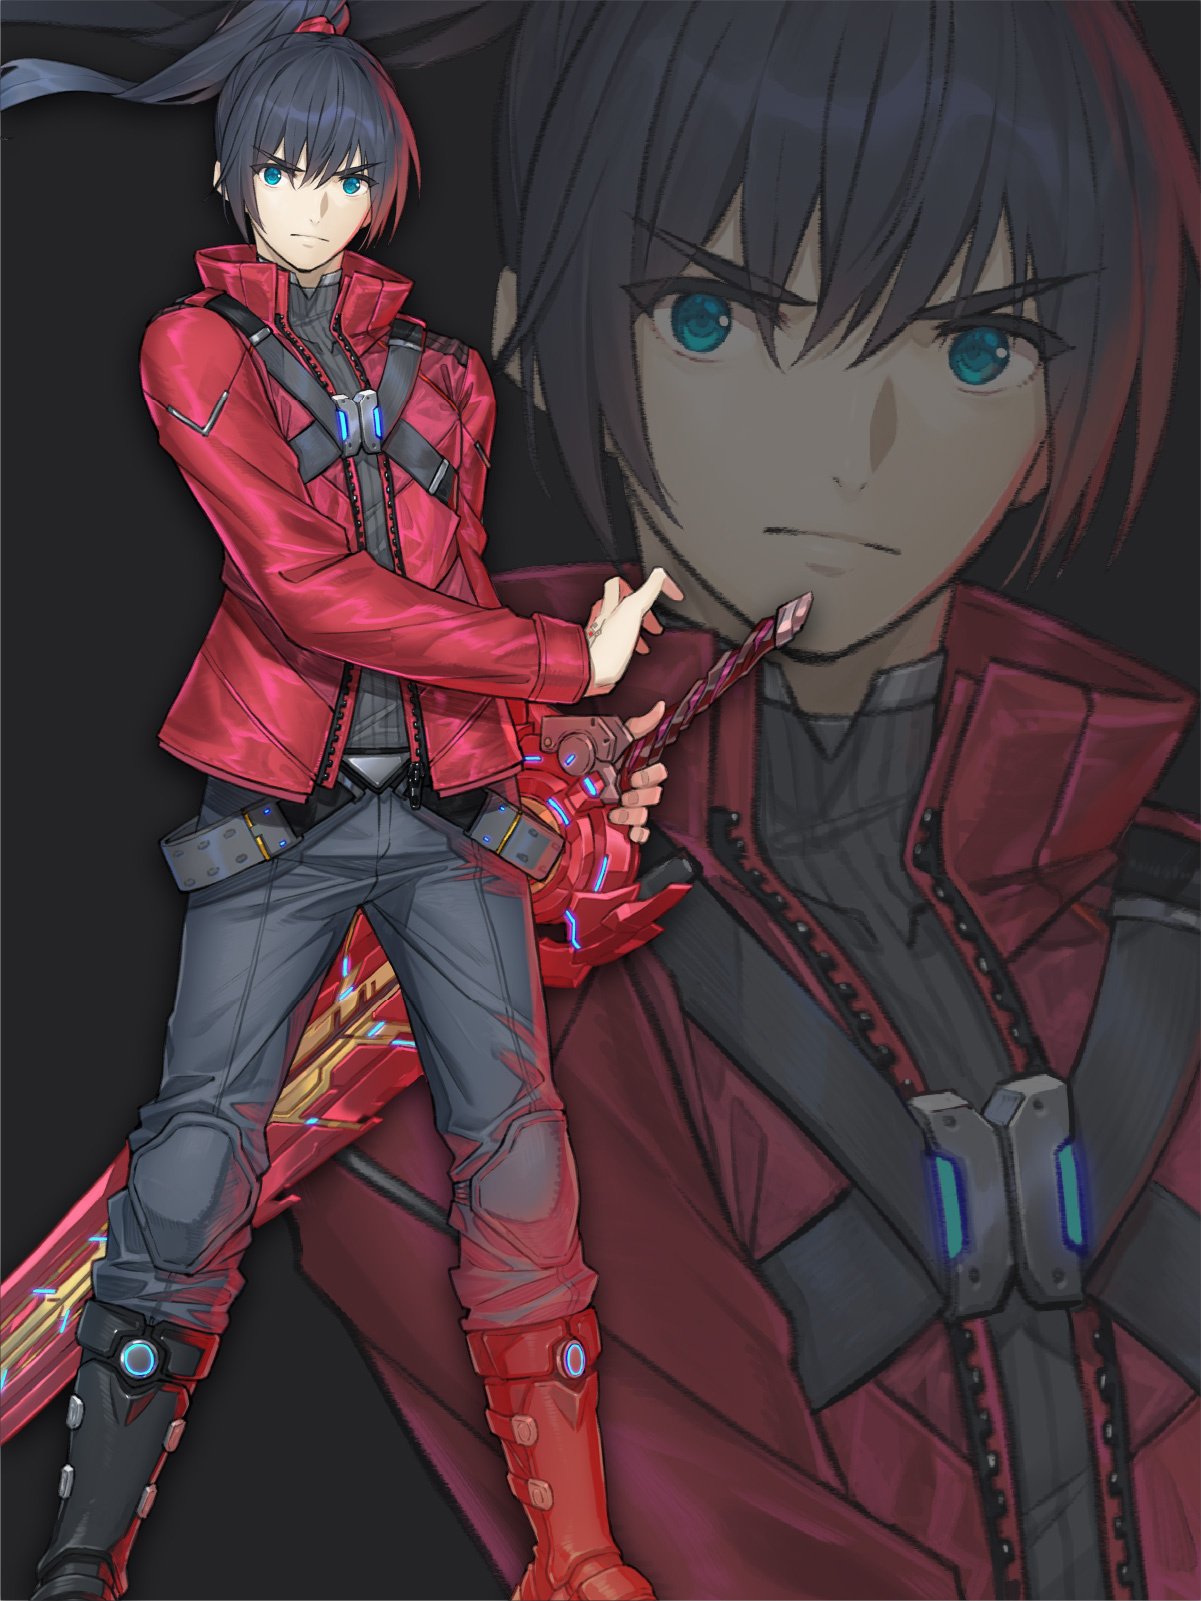 Apparently, the design for the next character was datamined. Here's an  early look at the next Hero DLC. : r/Xenoblade_Chronicles